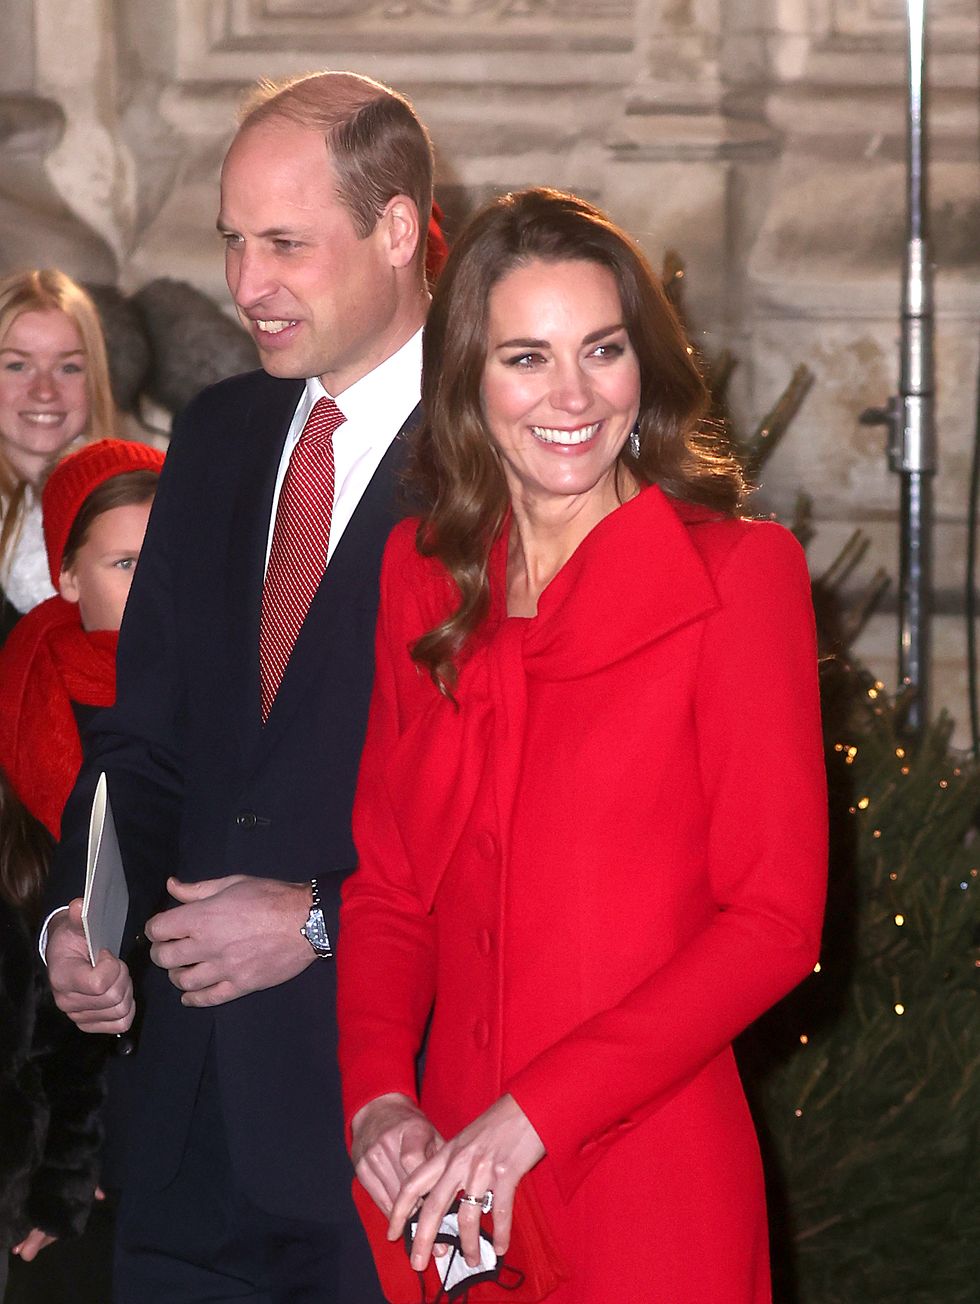 members of the royal family attend "together at christmas" community carol service